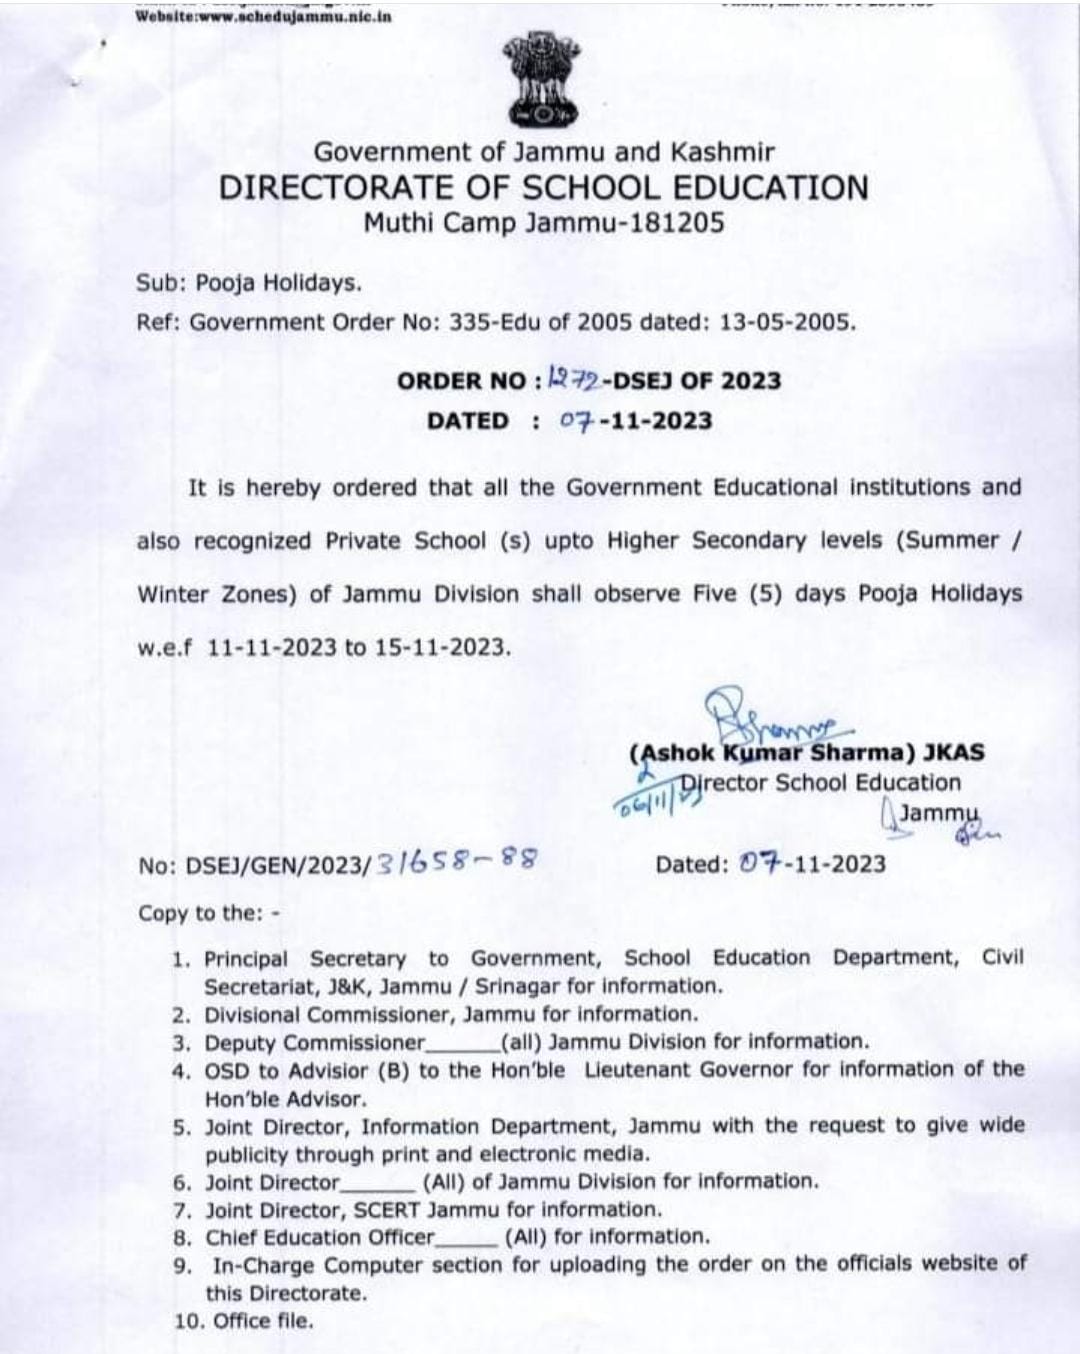 Pooja Holidays in schools across Jammu Division from November 11 to 15.